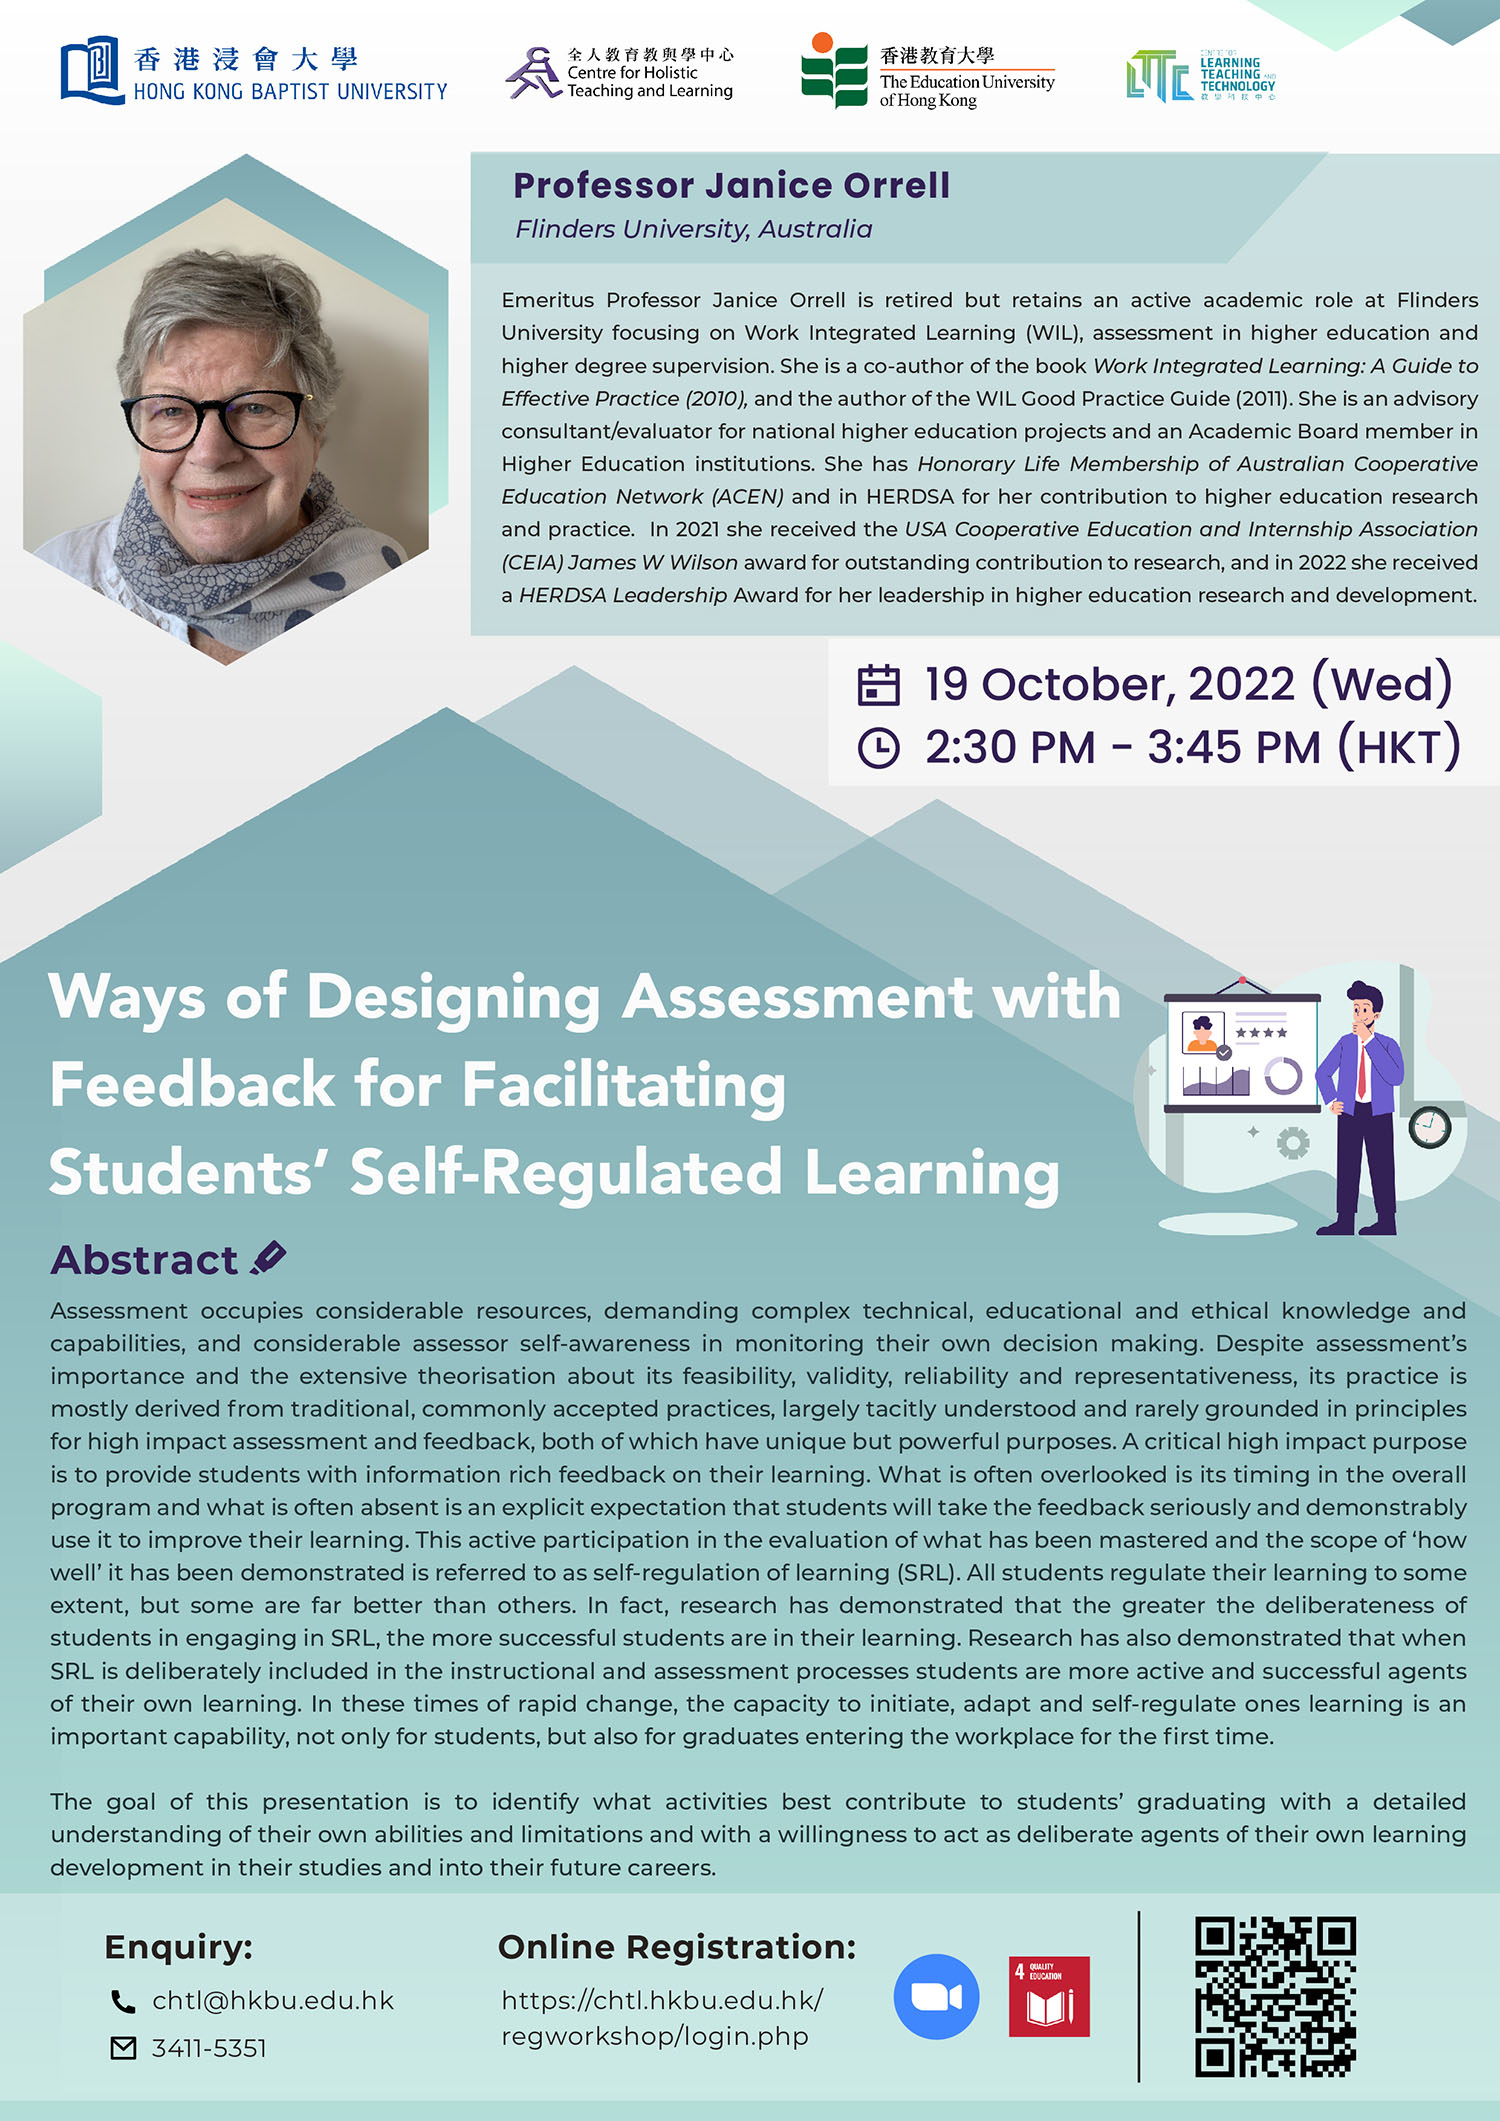 Ways of Designing Assessment with Feedback for Facilitating Students’ Self-Regulated Learning